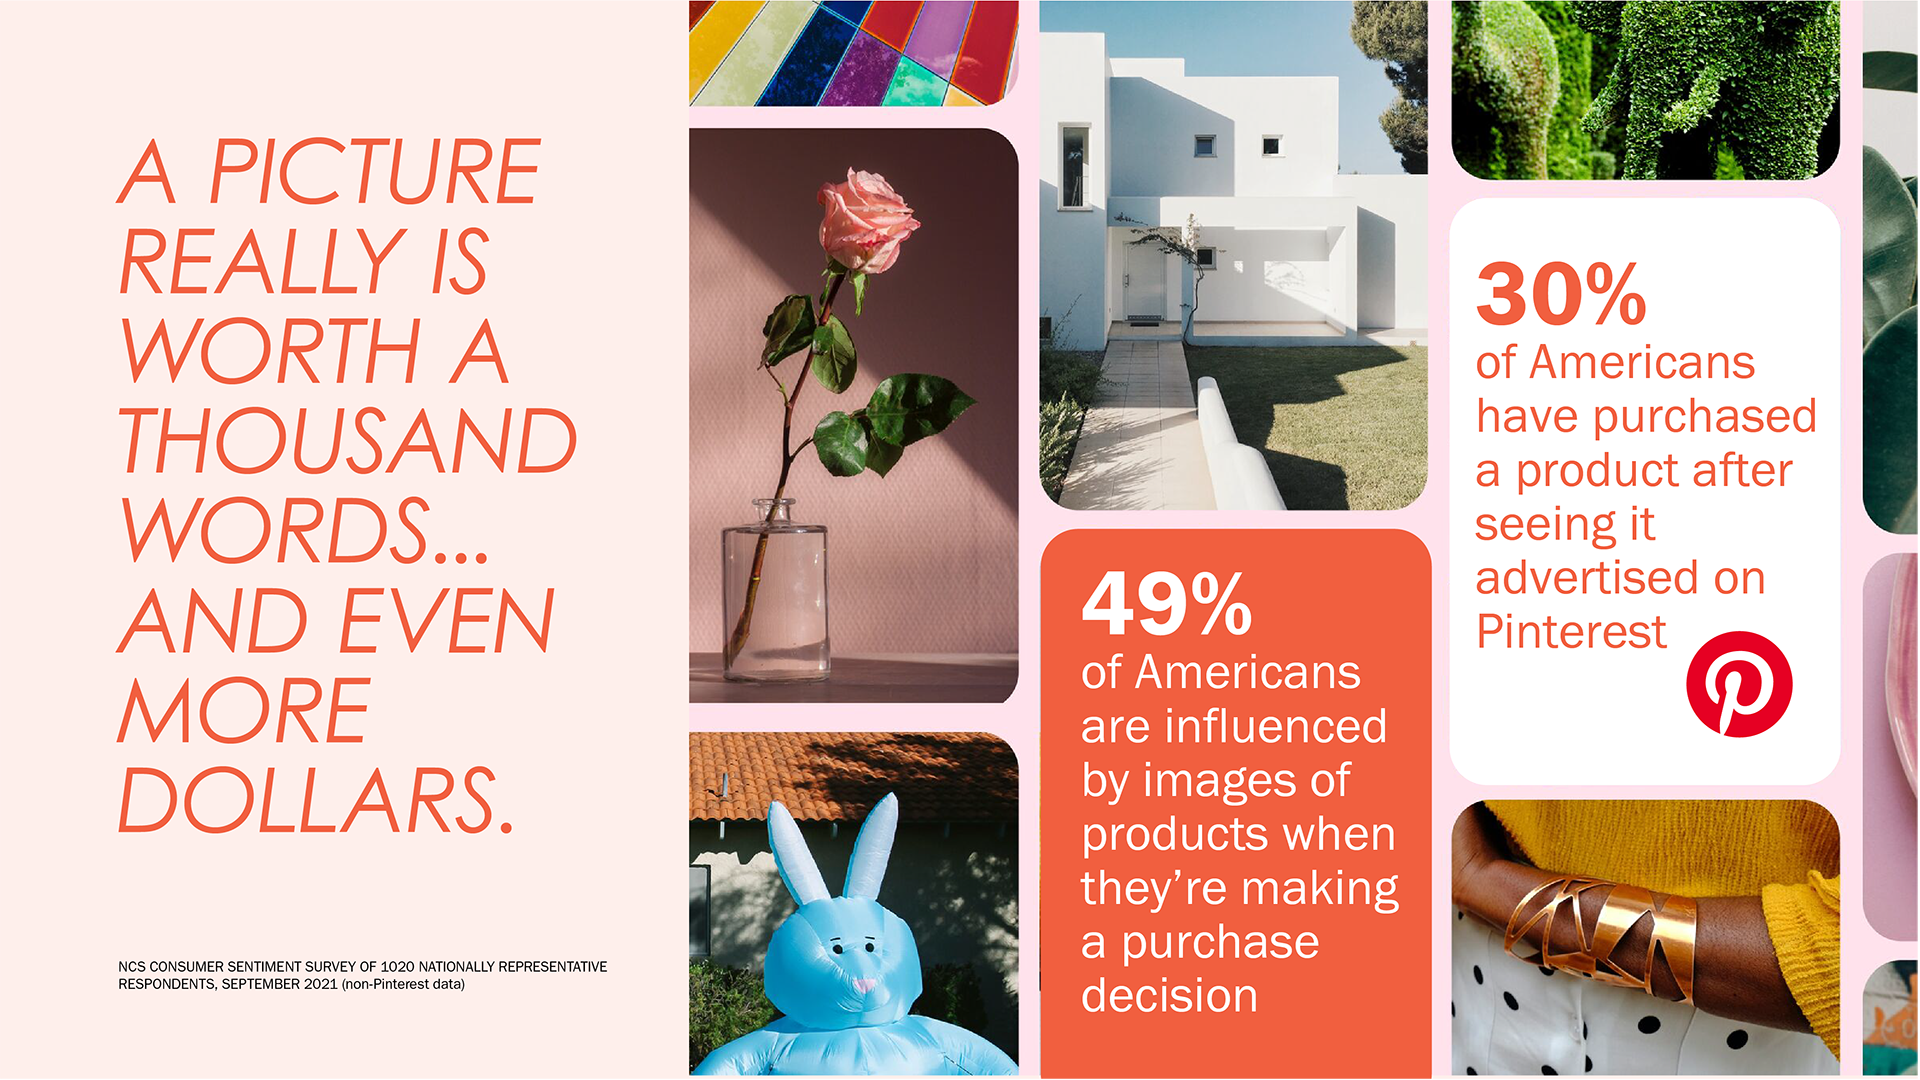 NCS survey results show the power of images in driving consumer purchases.